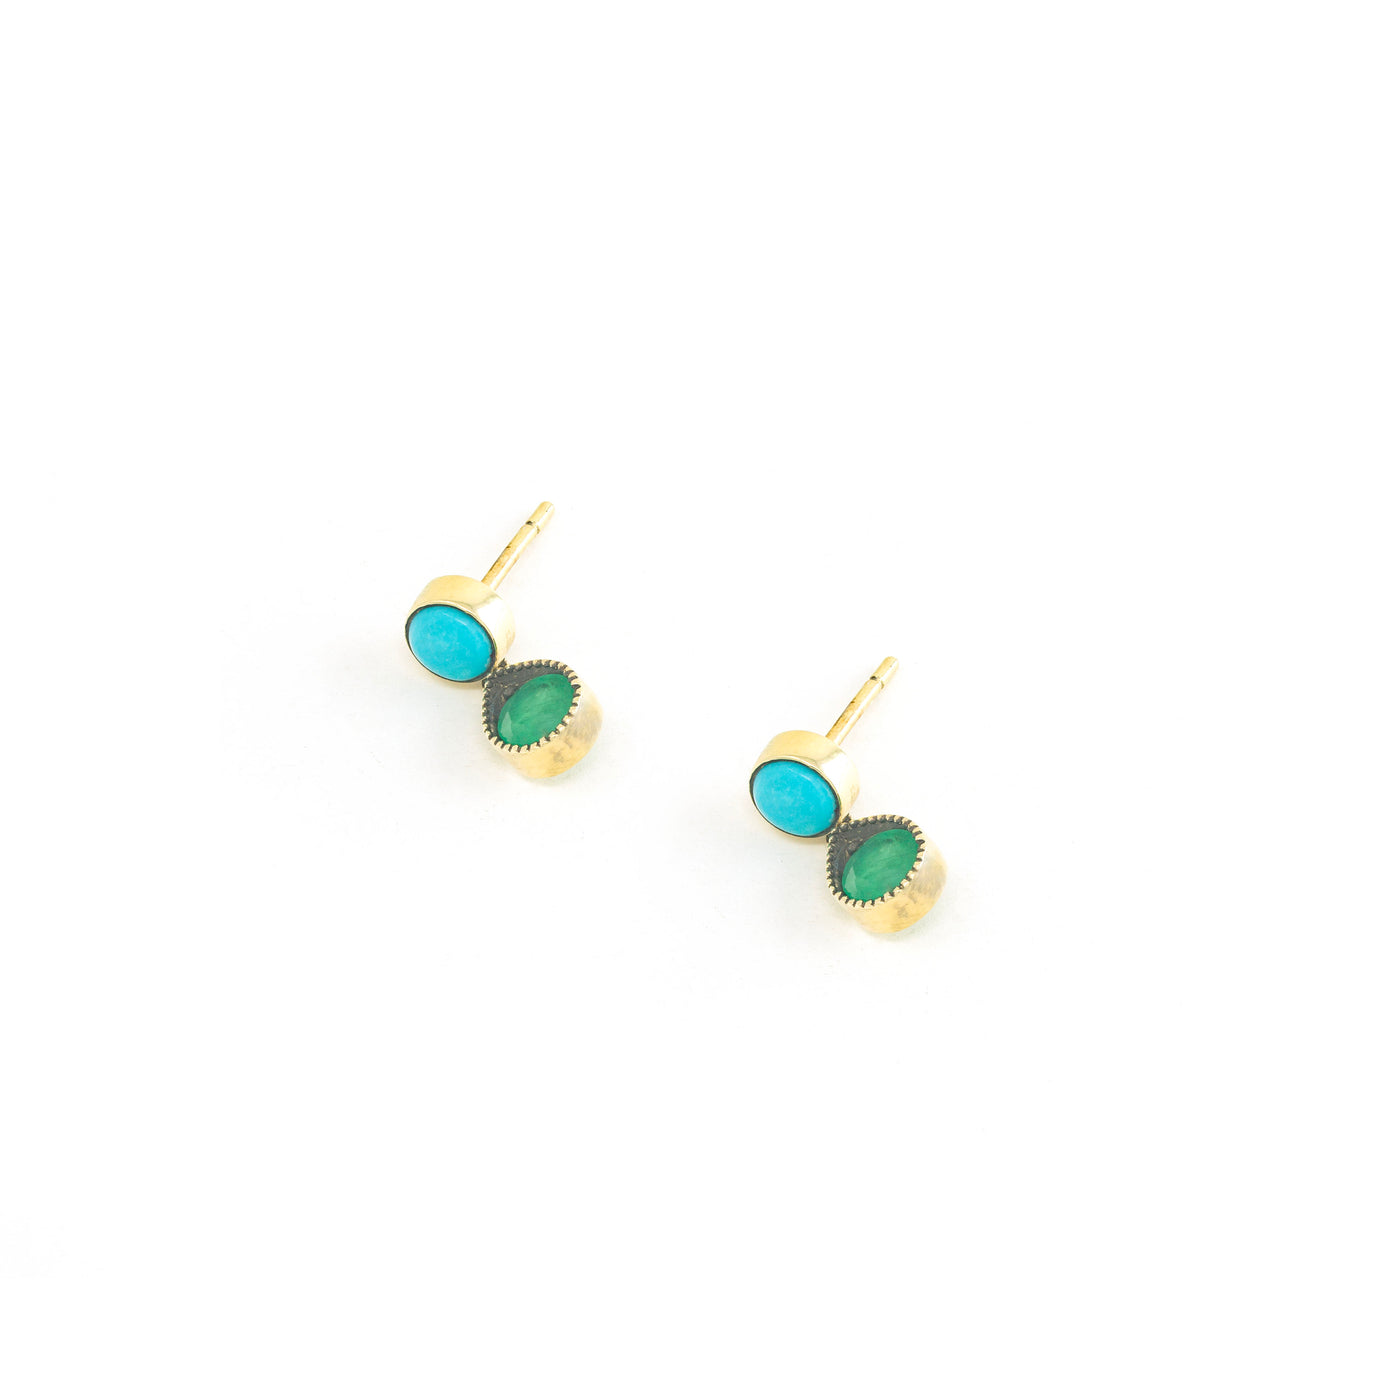 Turquoise and Emerald Drop Earrings